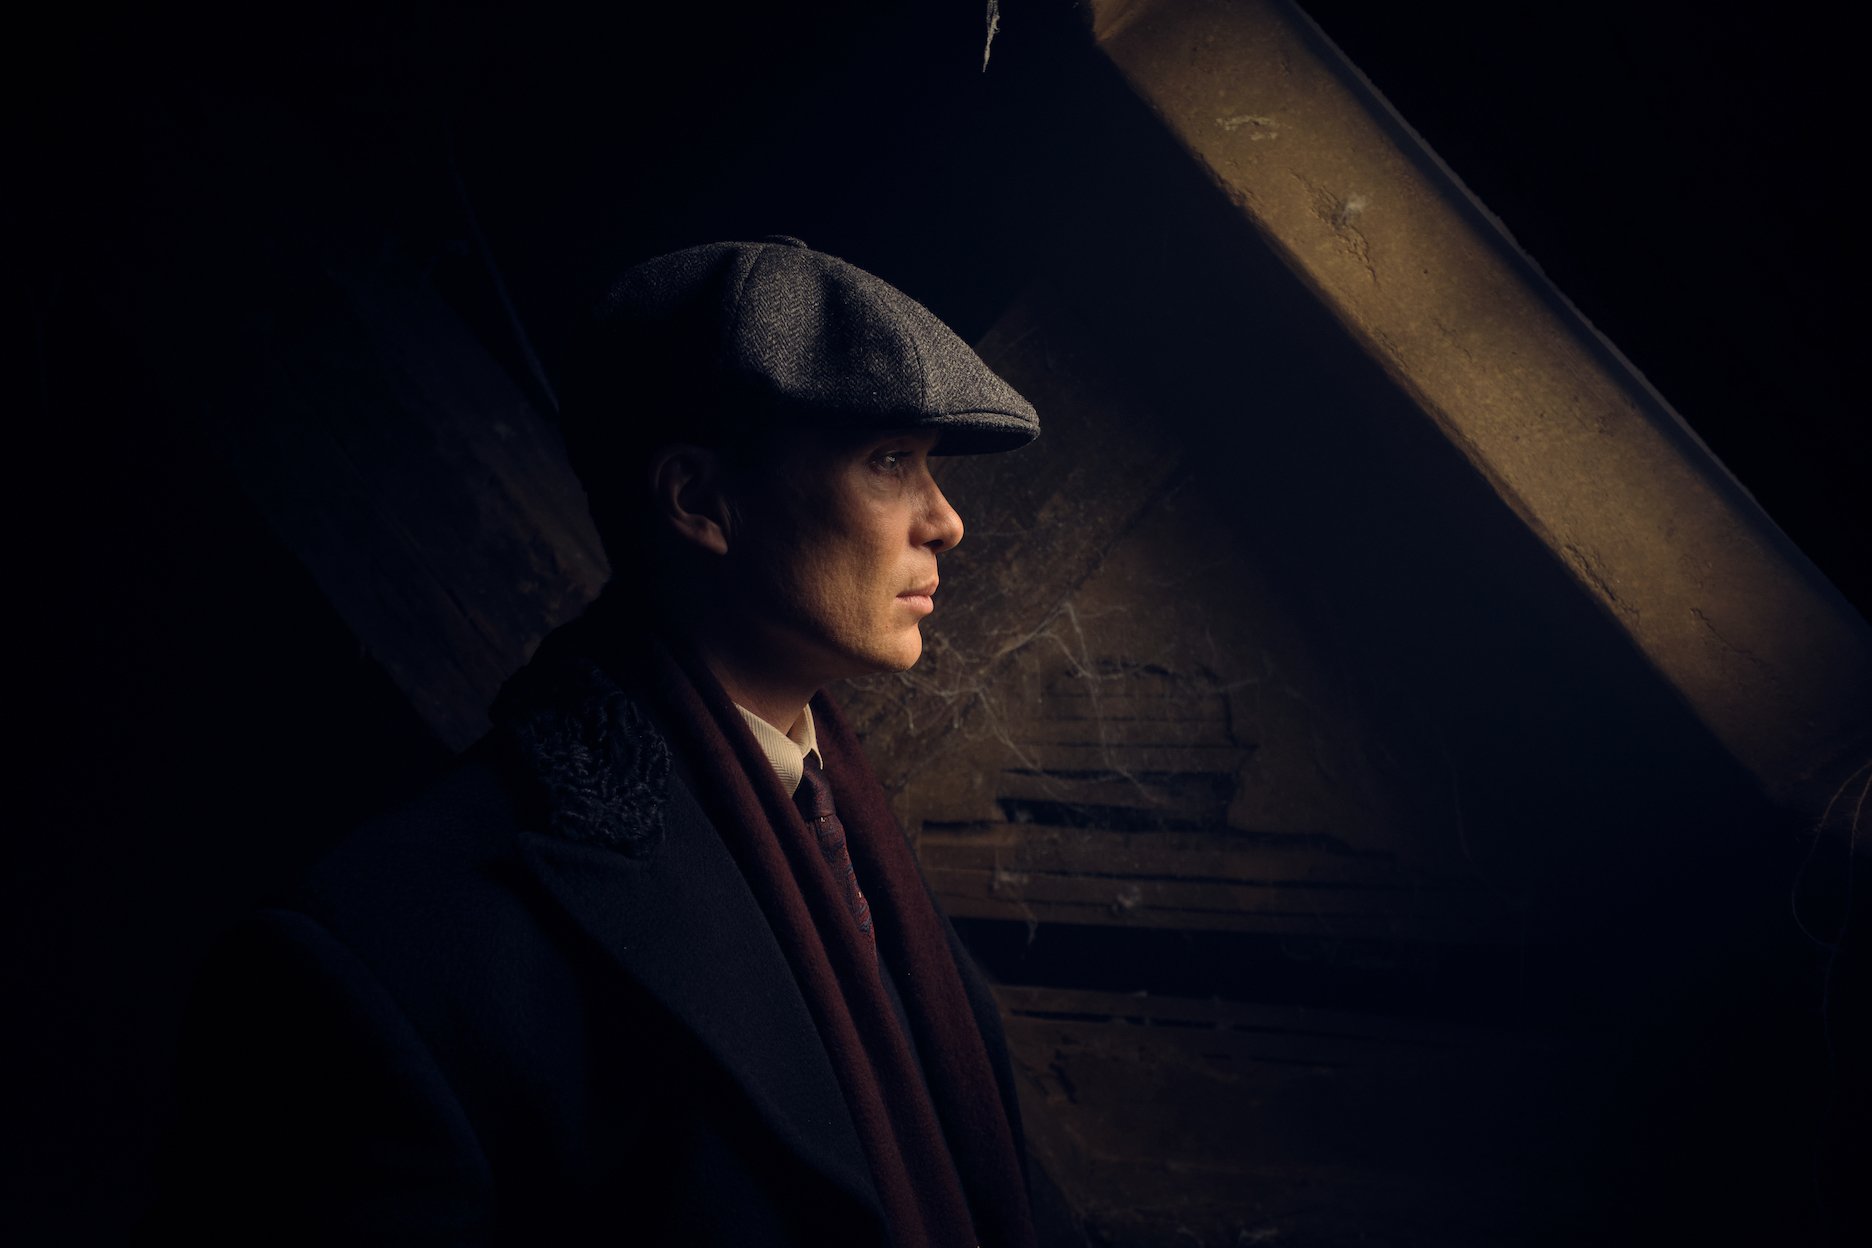 Thomas Shelby's profile as he's standing in a shadow in 'Peaky Blinders' Season 6